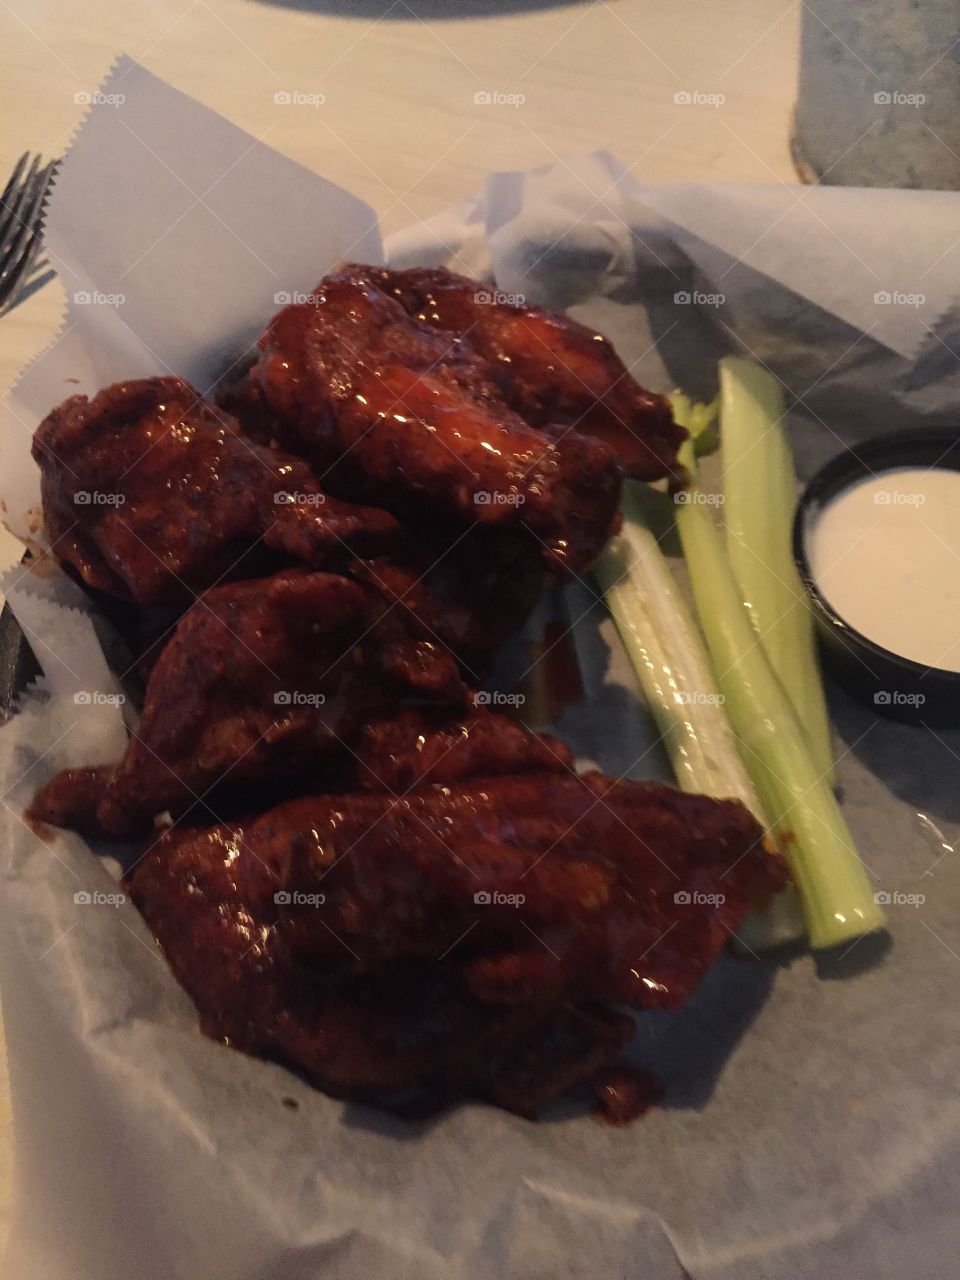 Extra extra hot wings! 